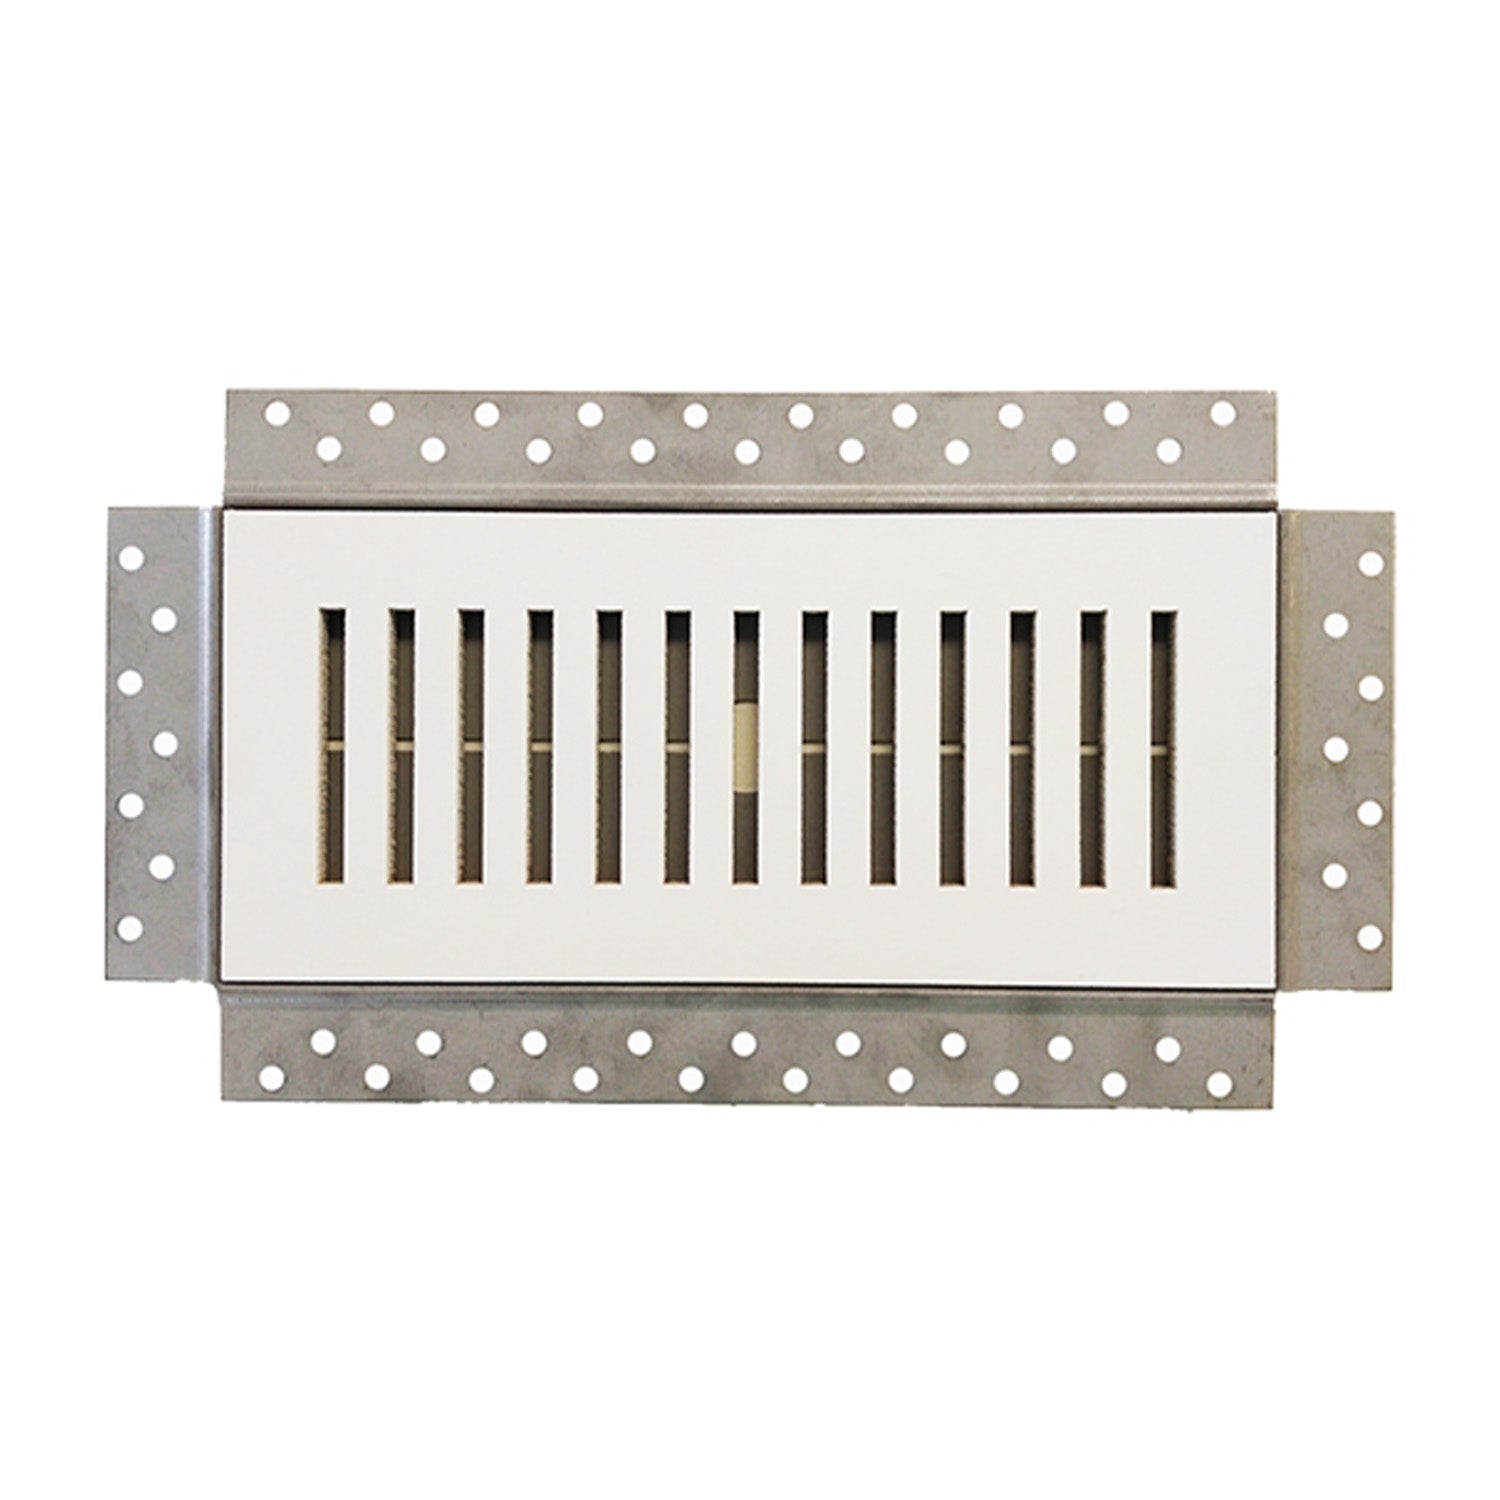 ENVISIVENT (CB5024) – Removable Magnetic Mud-In Flush Mounted Wall/Ceiling Air Supply Vent, 4” x 12” Duct